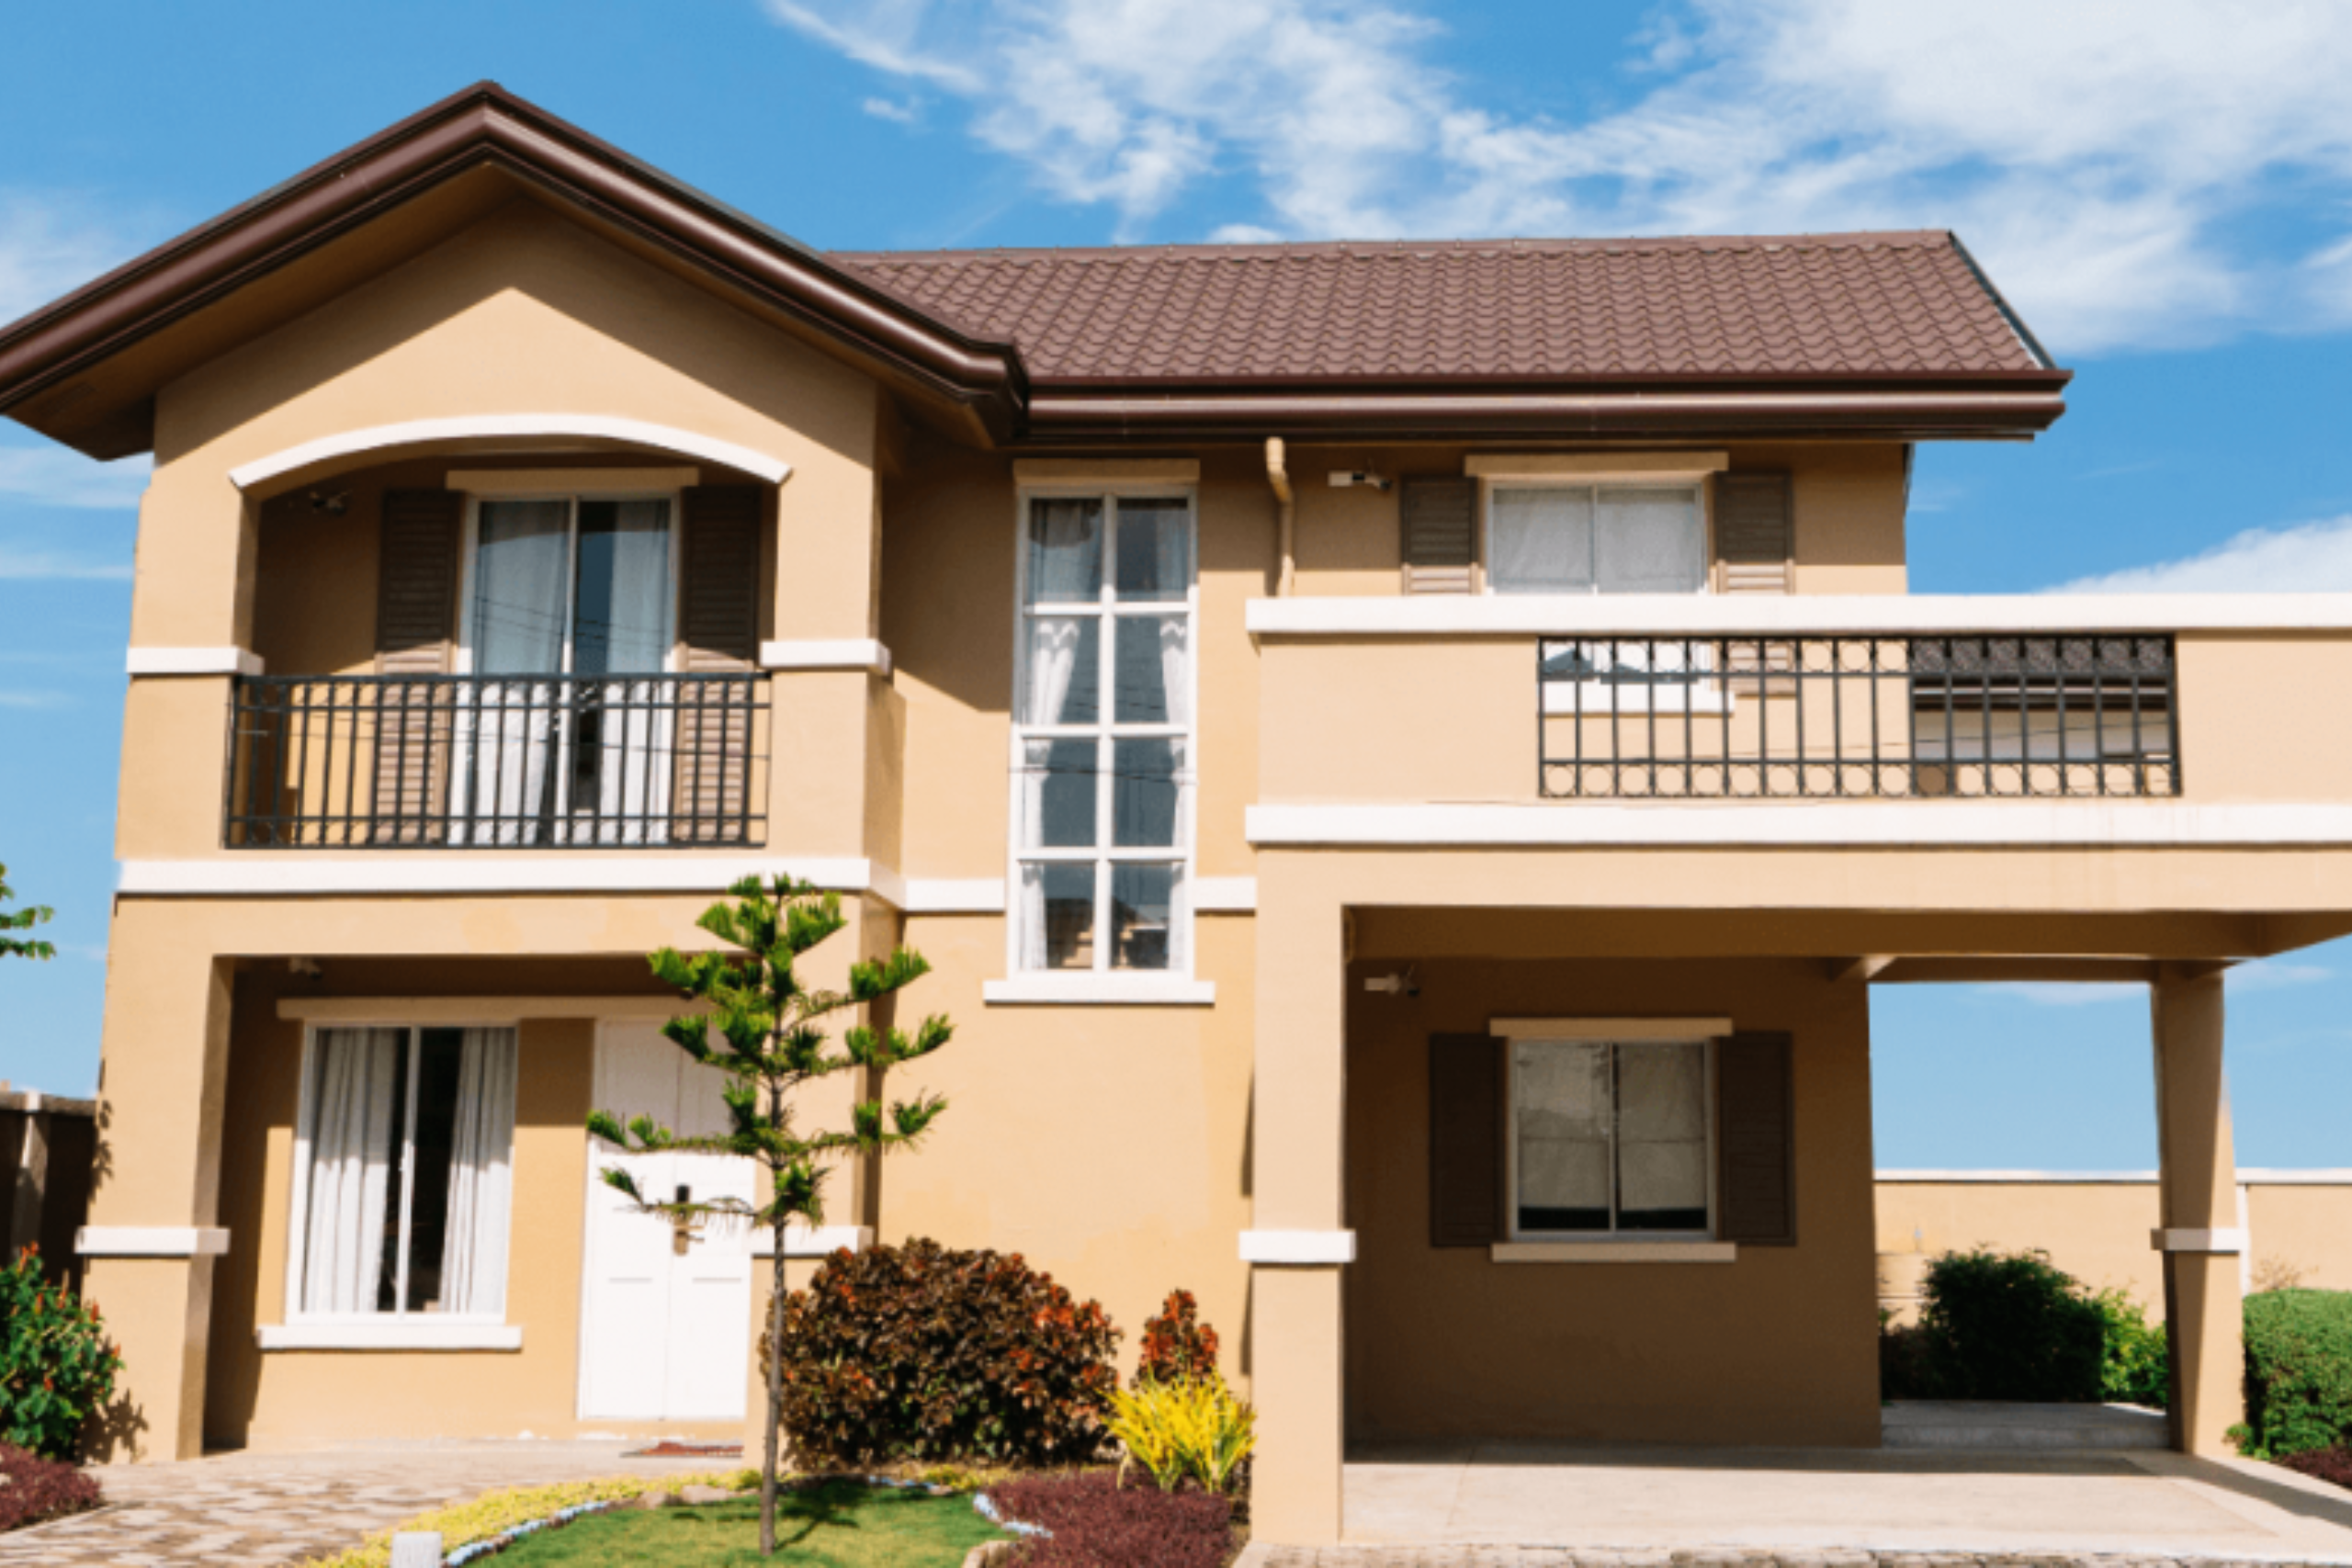 Reasons Why OFWs Should Purchase A Home at its Pre-Selling Stage